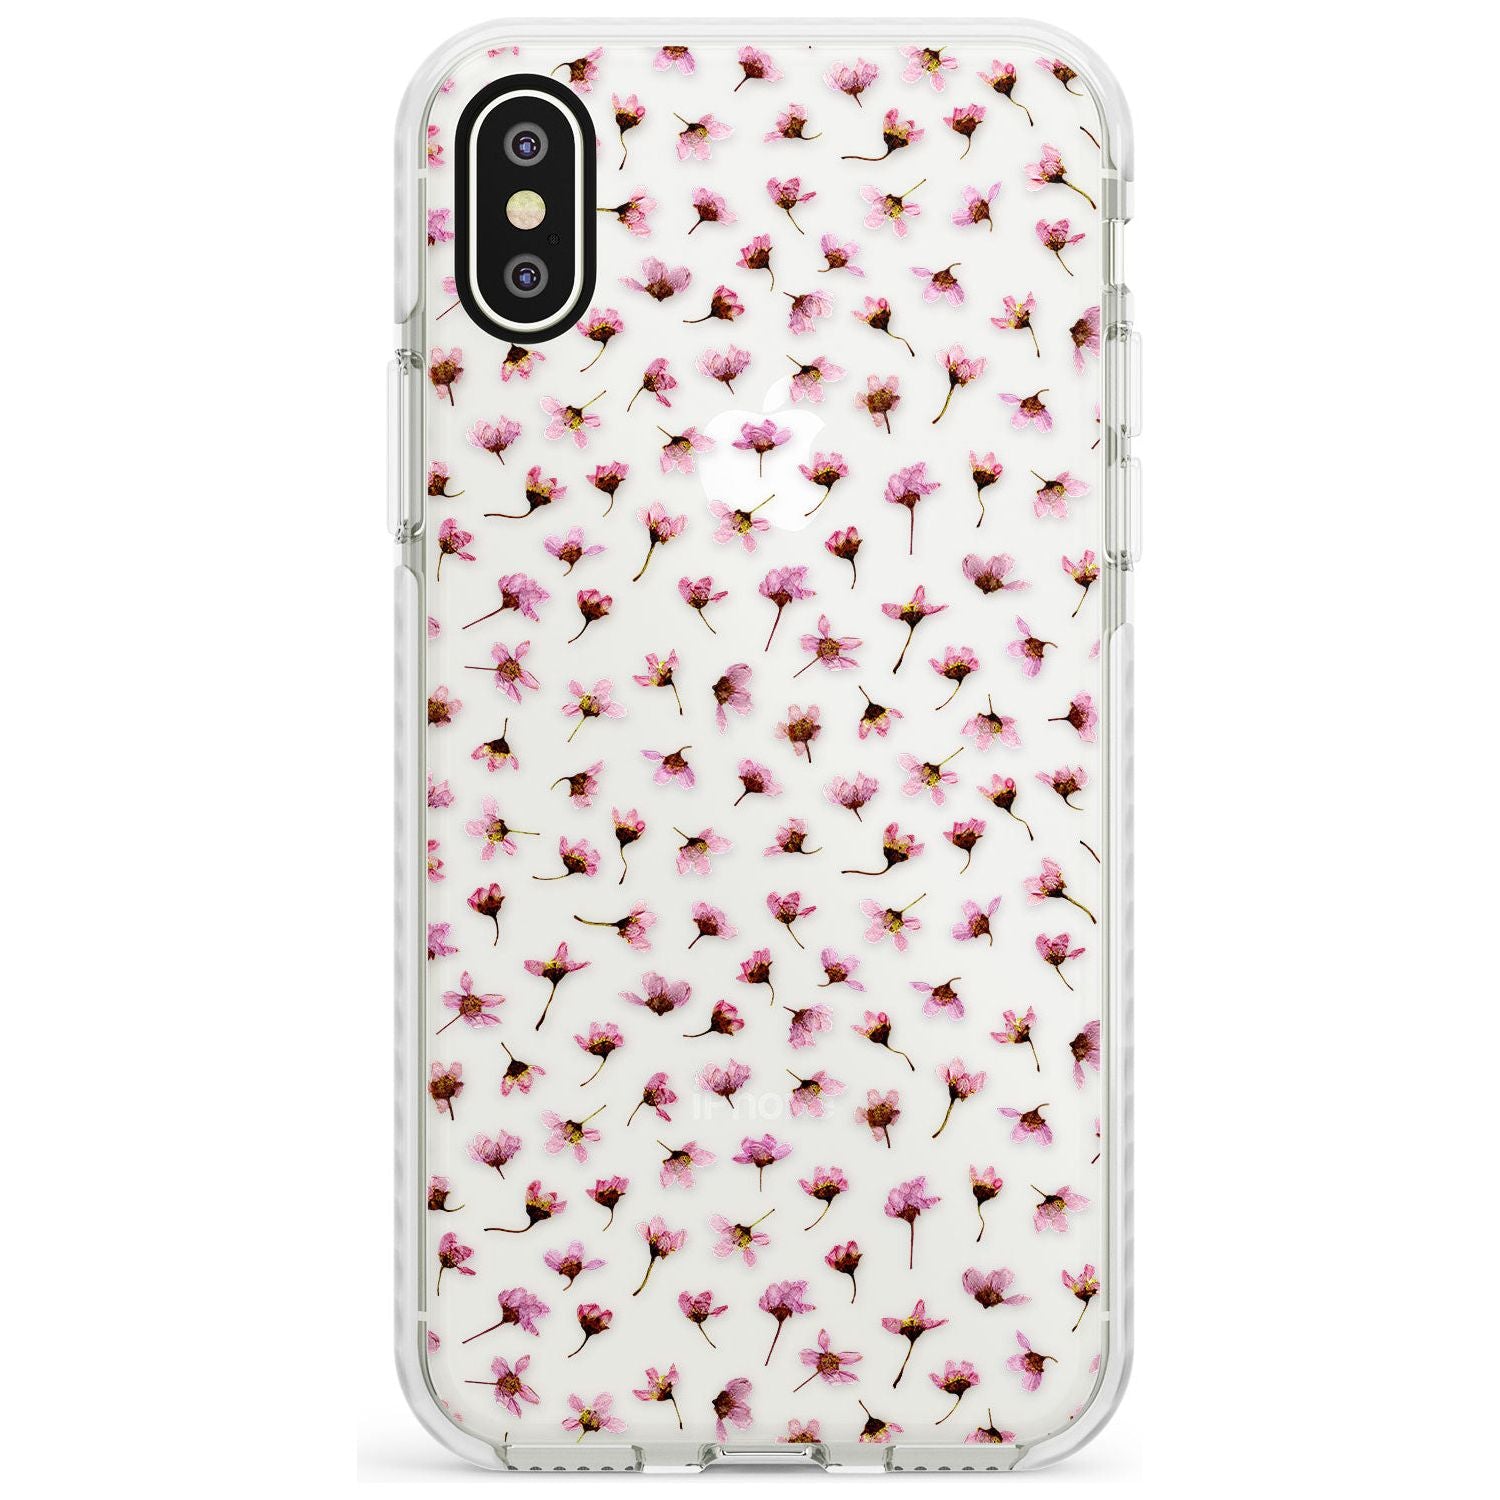 Small Pink Blossoms Transparent Design Impact Phone Case for iPhone X XS Max XR